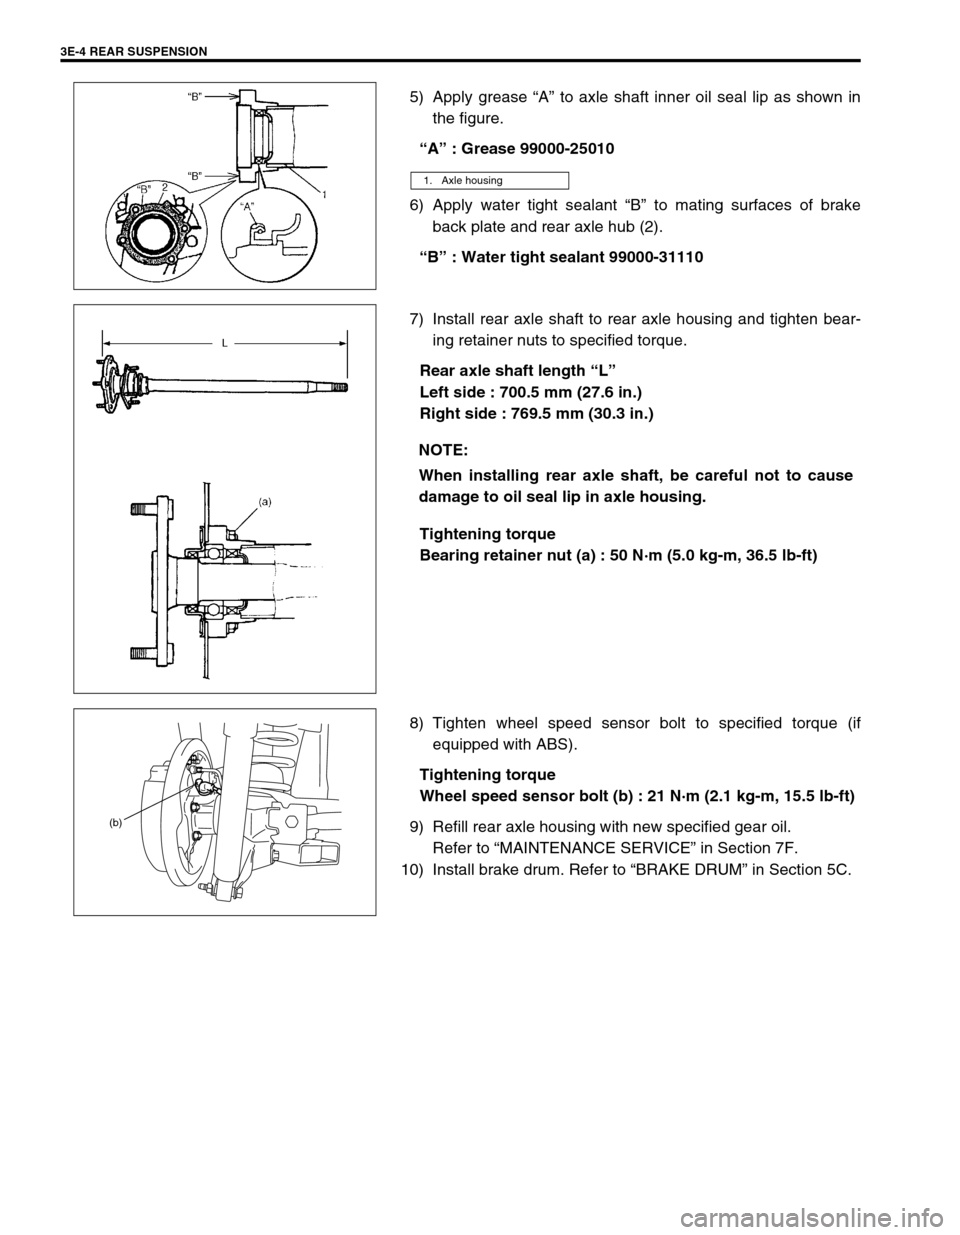 SUZUKI GRAND VITARA 1999 2.G Owners Guide 3E-4 REAR SUSPENSION
5) Apply grease “A” to axle shaft inner oil seal lip as shown in
the figure.
“A” : Grease 99000-25010
6) Apply water tight sealant “B” to mating surfaces of brake
back